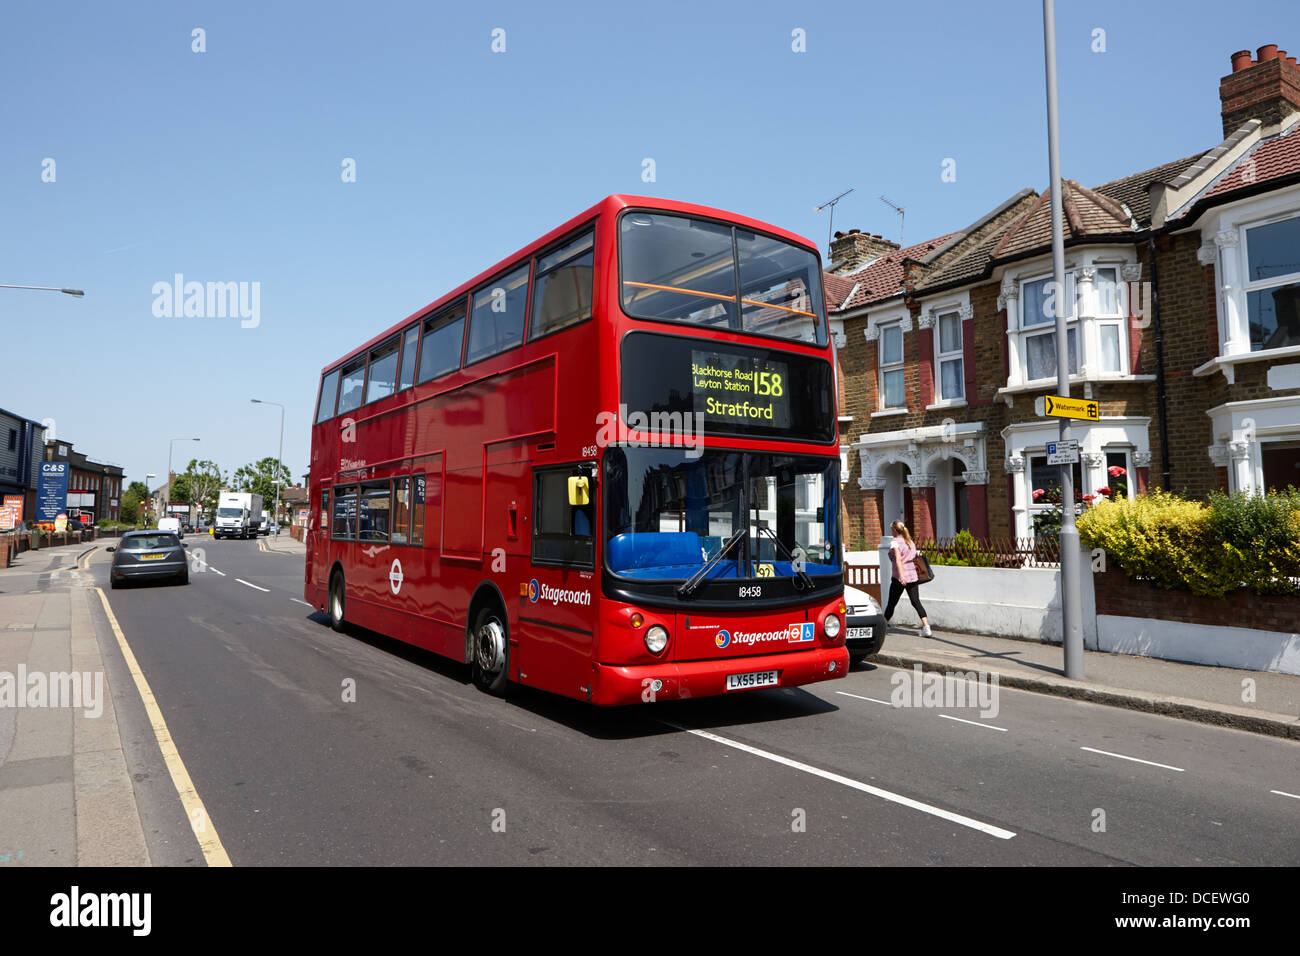 stagecoach red double deck bus in london suburbs London England UK Stock Photo